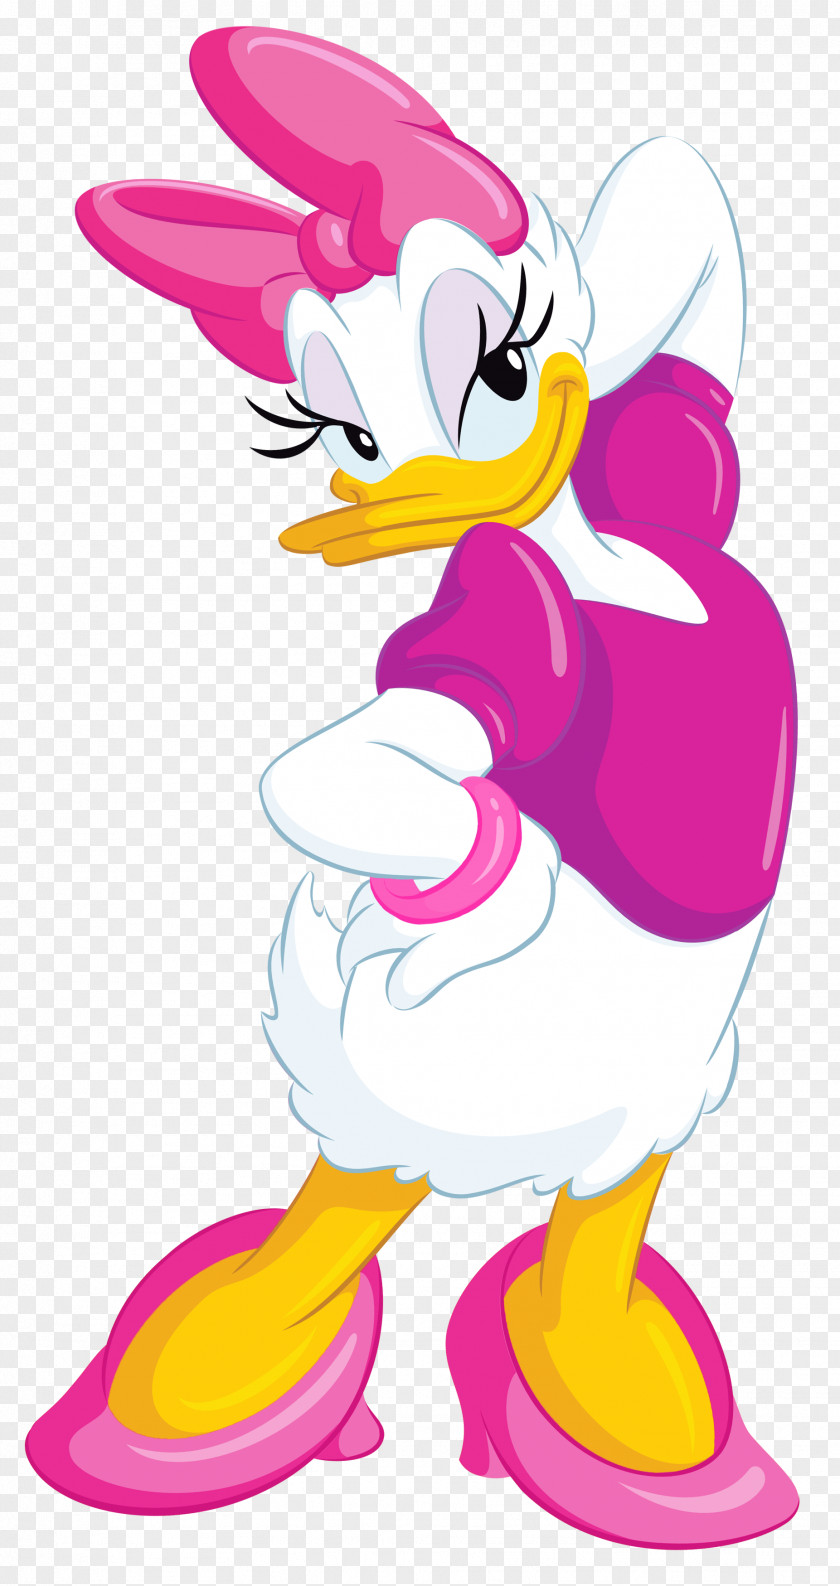 Daisy Duck Transparent Clip Art Image Donald Minnie Mouse Mickey Goofy PNG